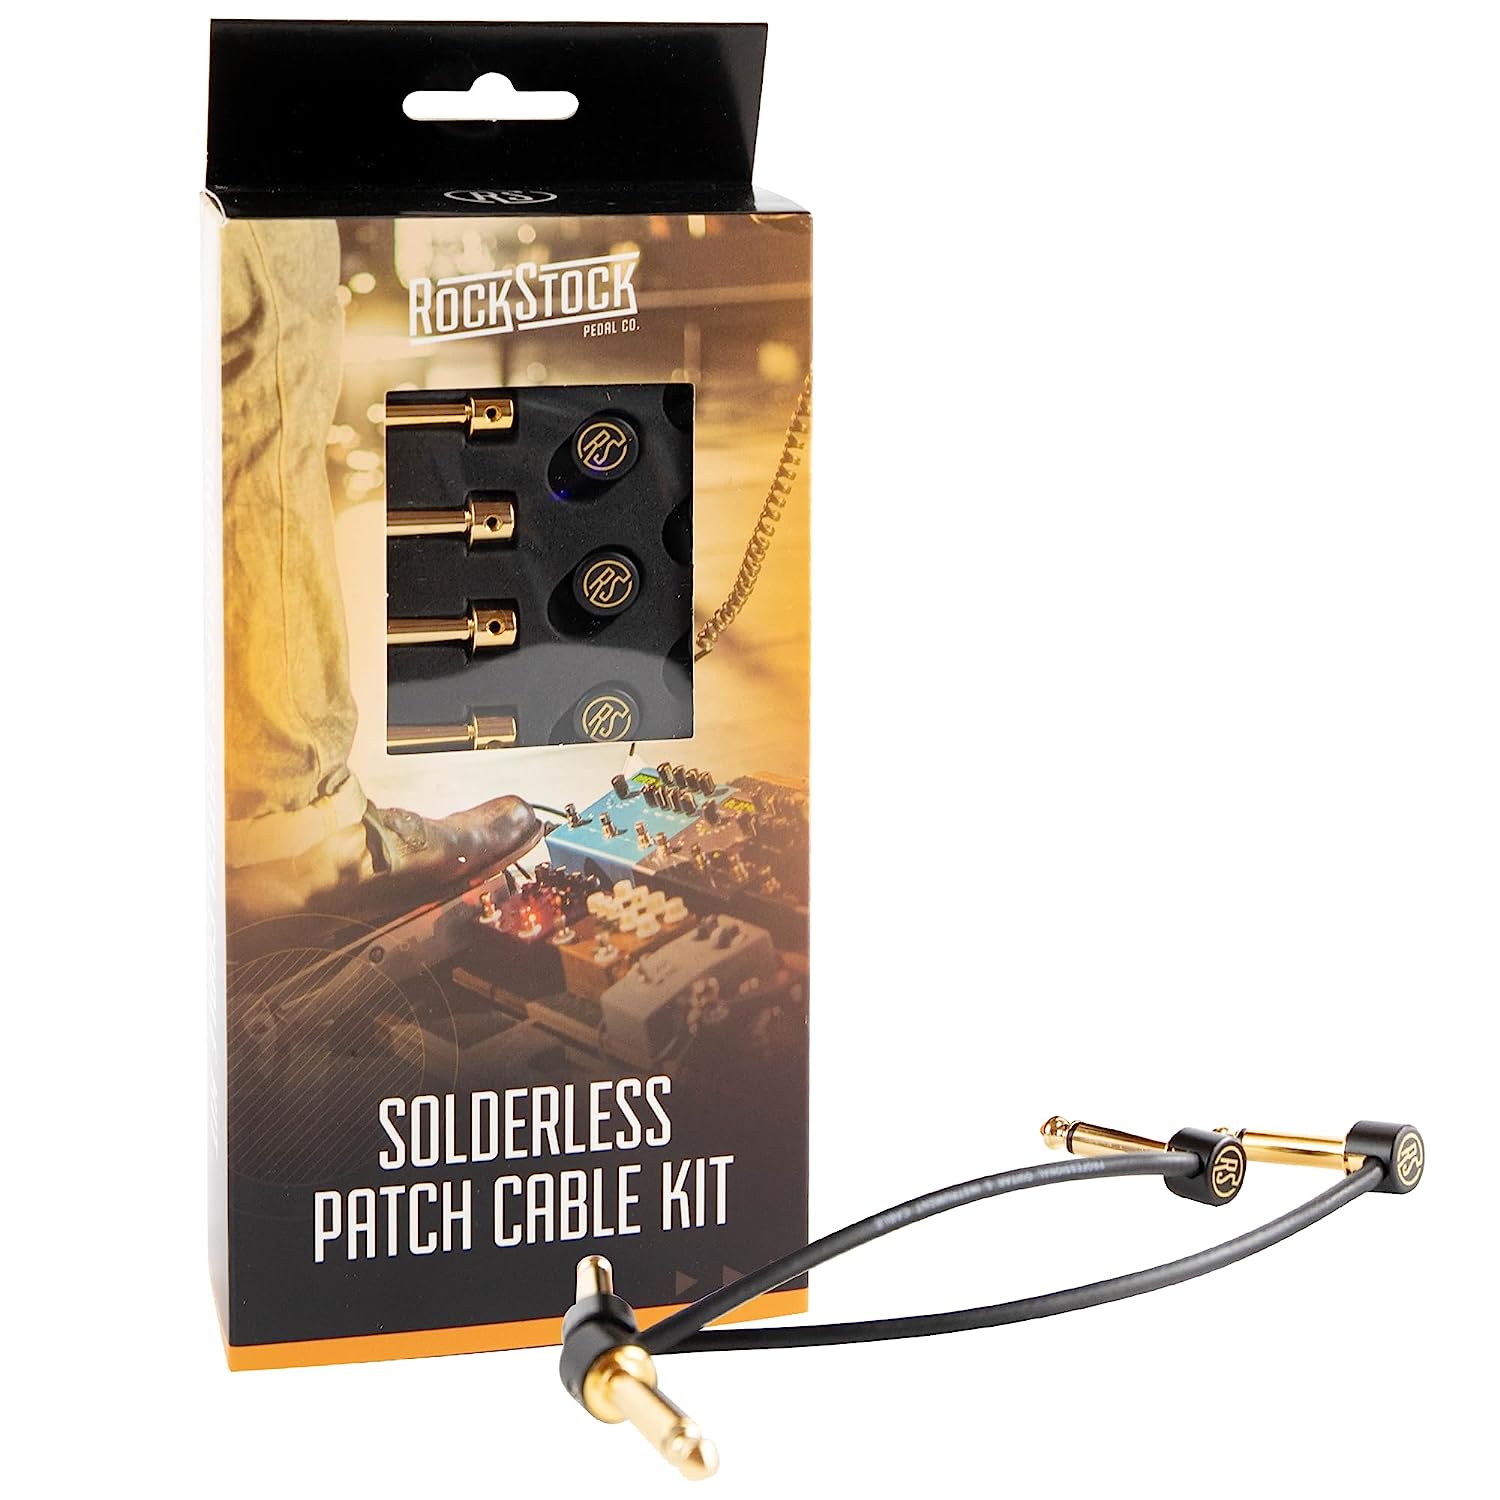 Solderless Pedalboard Patch Cable Kit - rockstockpedals